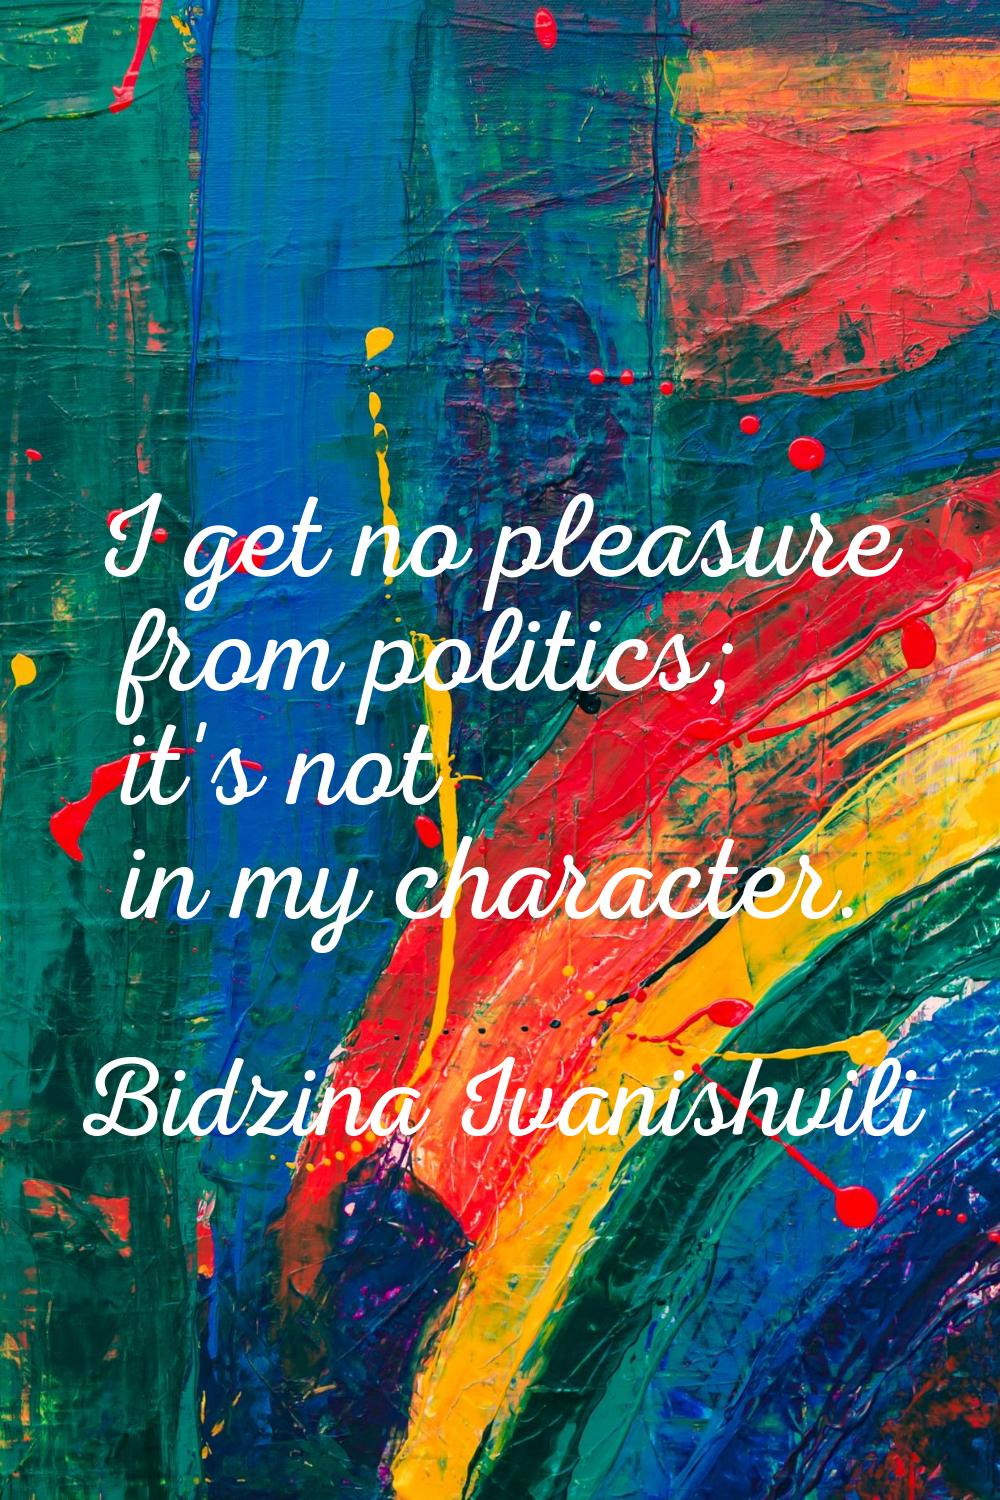 I get no pleasure from politics; it's not in my character.